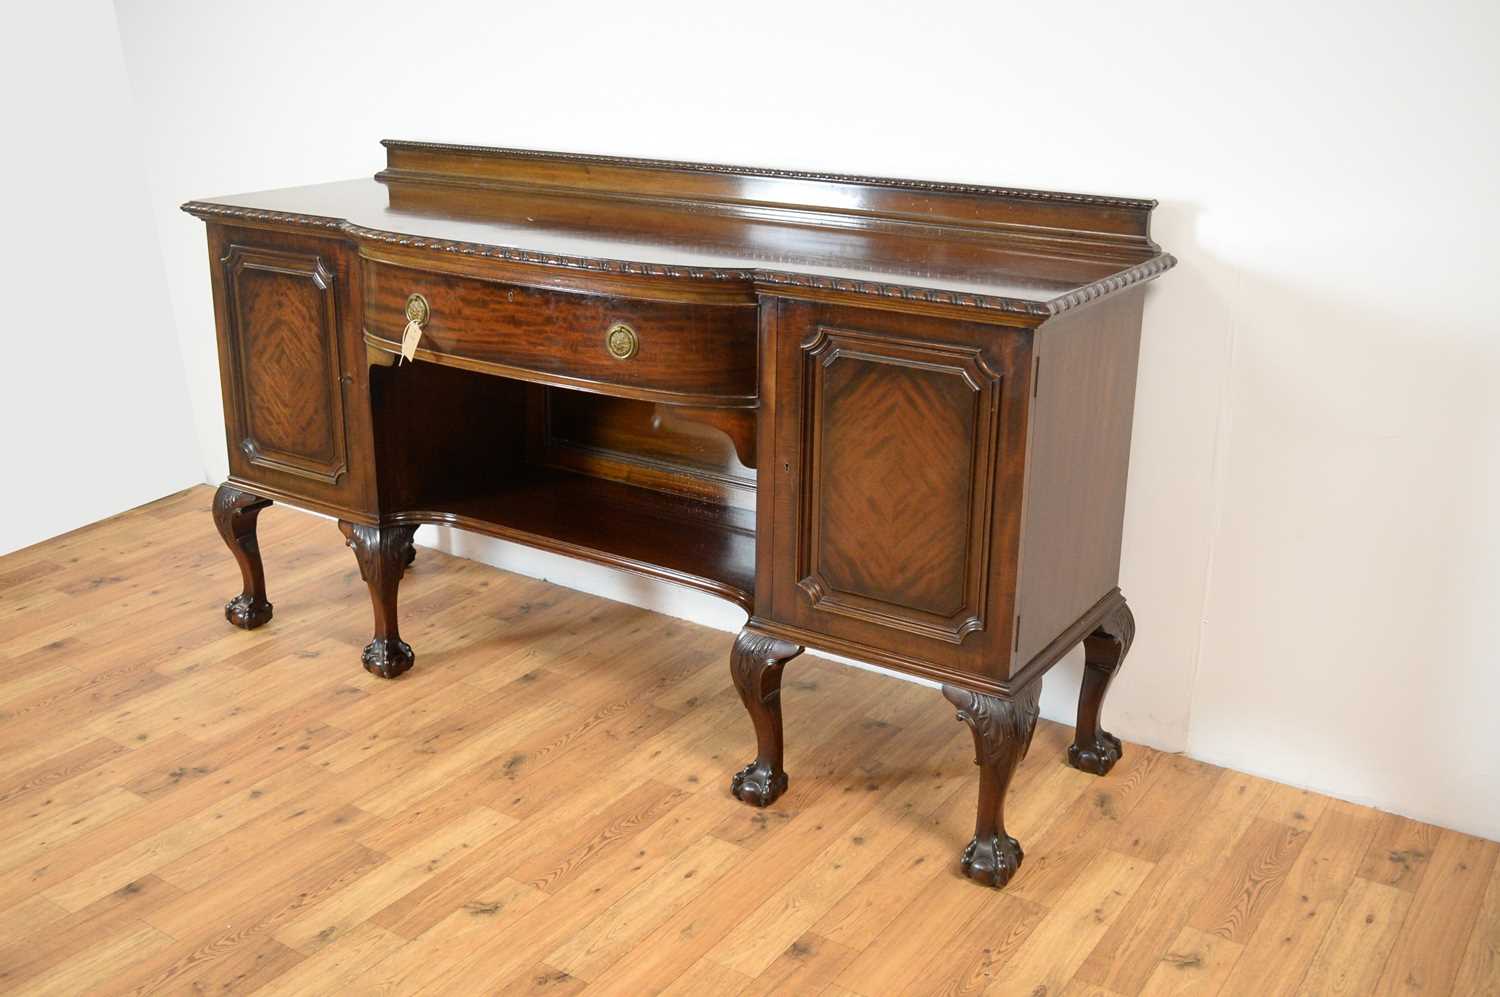 Waring and Gillows: An early 20th century mahogany bowfront sideboard - Image 3 of 4